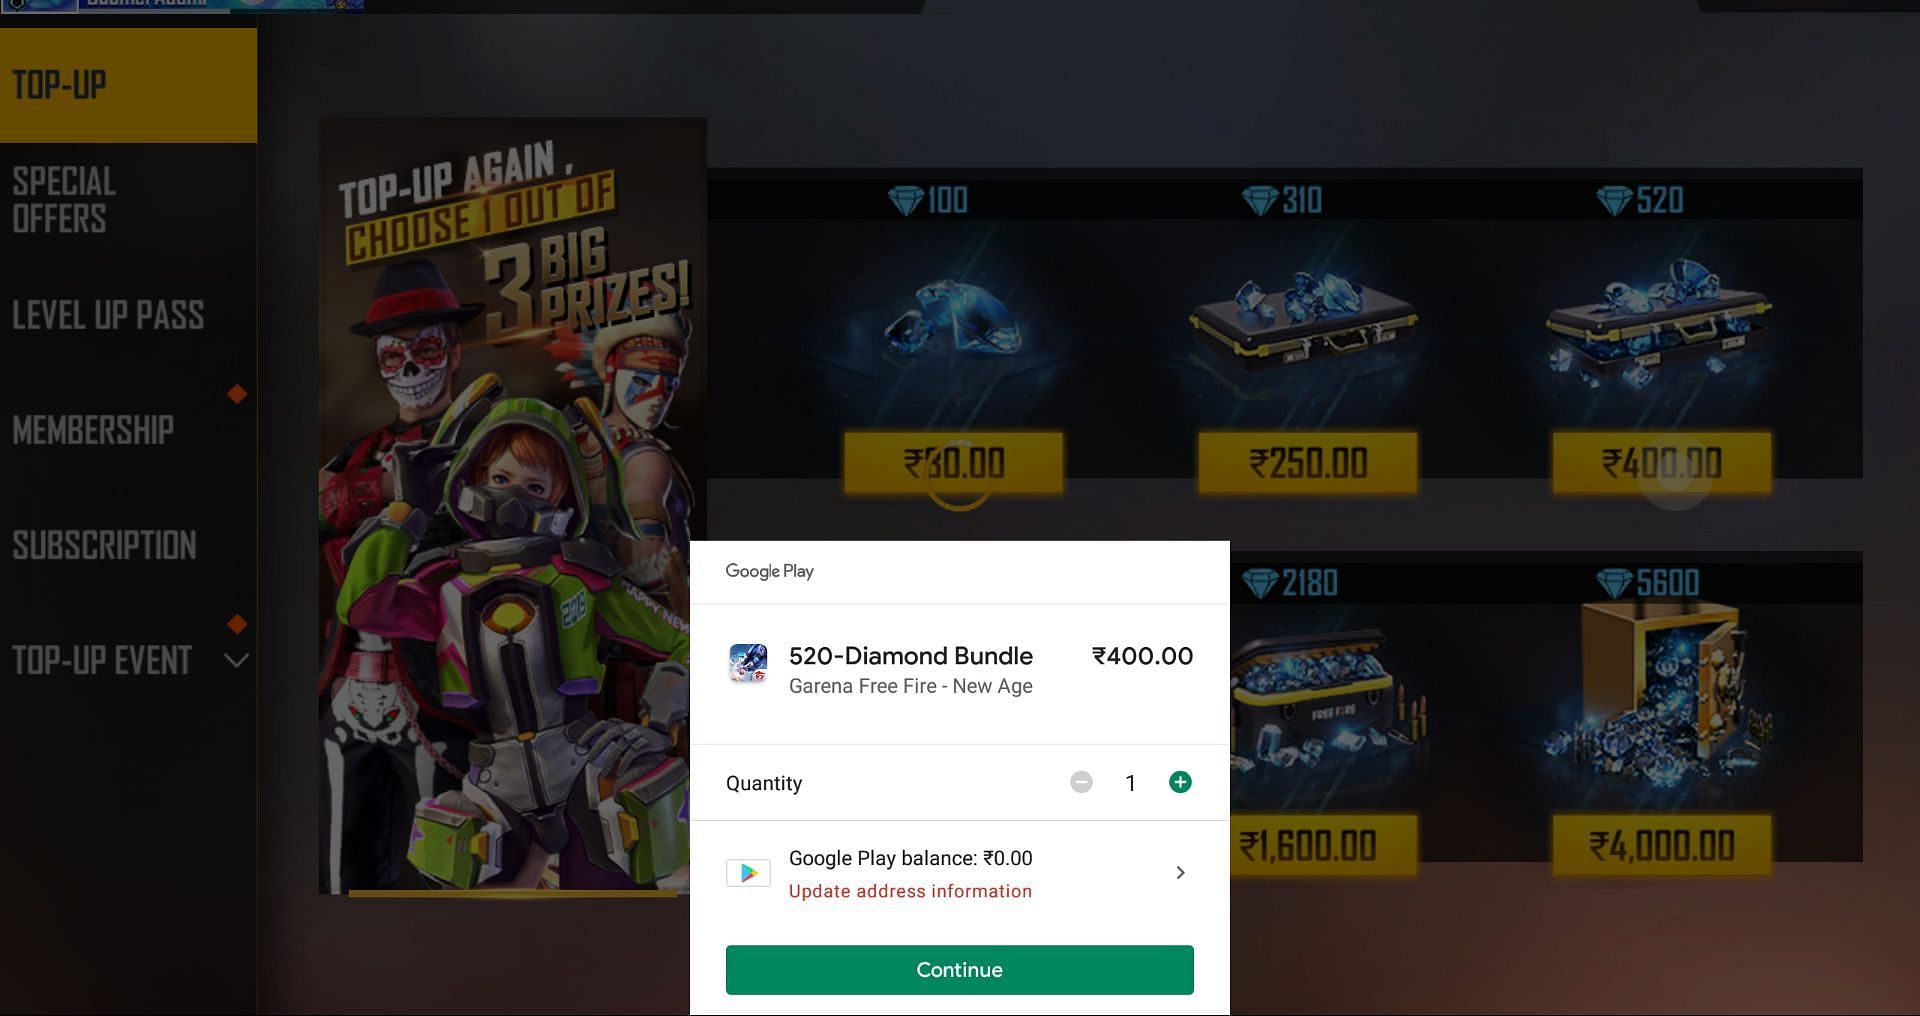 Payment must be completed by users (Image via Garena)